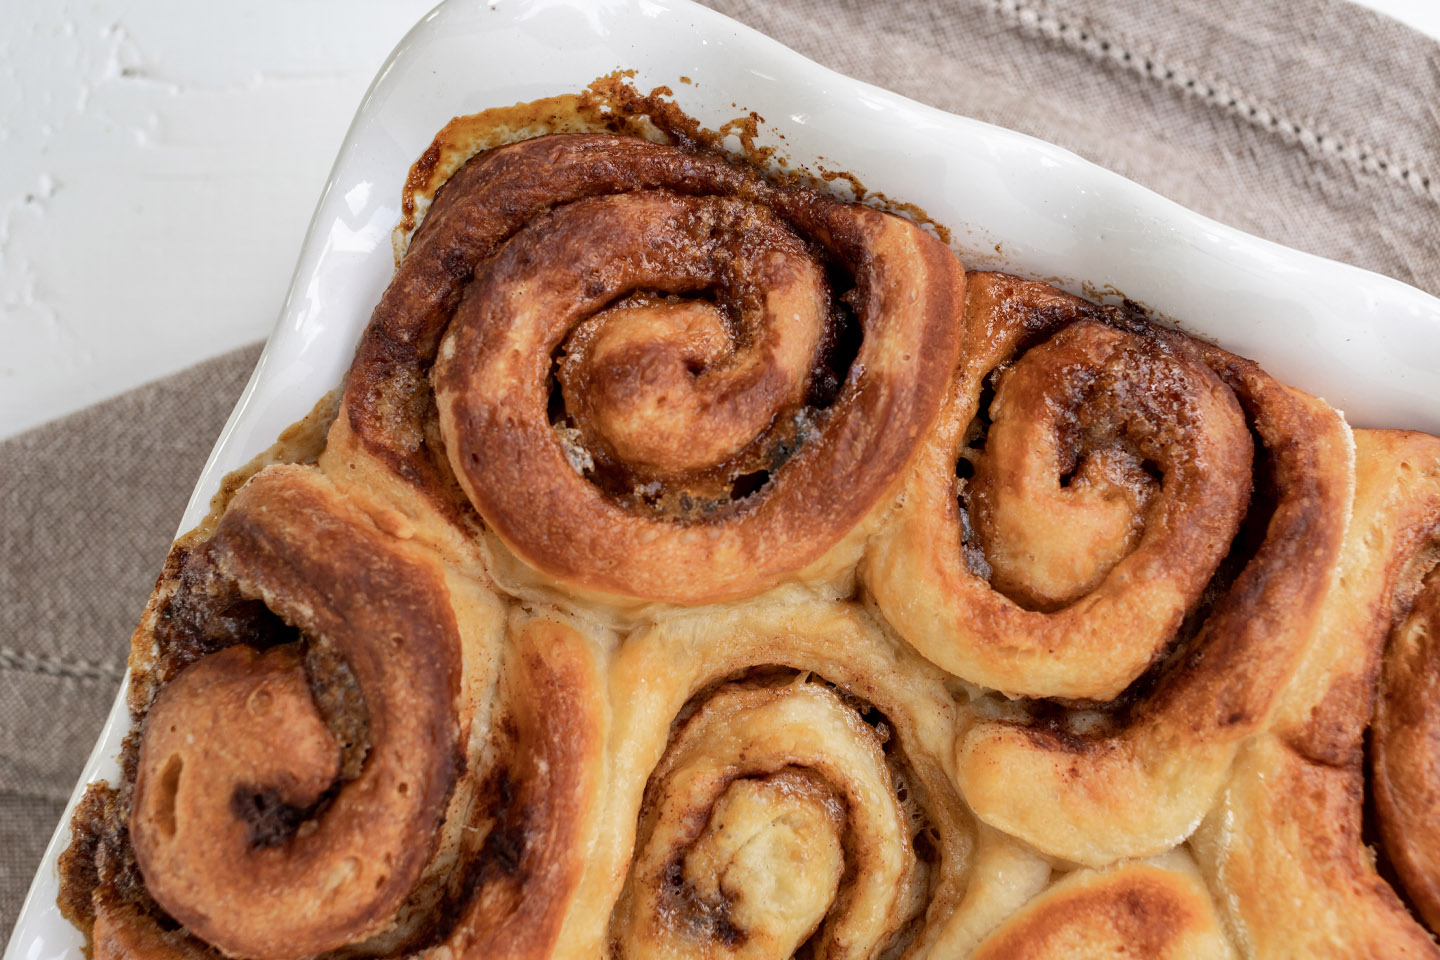 Sharing my favourite Sunday Morning Cinnamon Rolls Recipe today! This recipe happens to be plant-based, but feel free to use whatever non-plant-based substitutions you like instead.